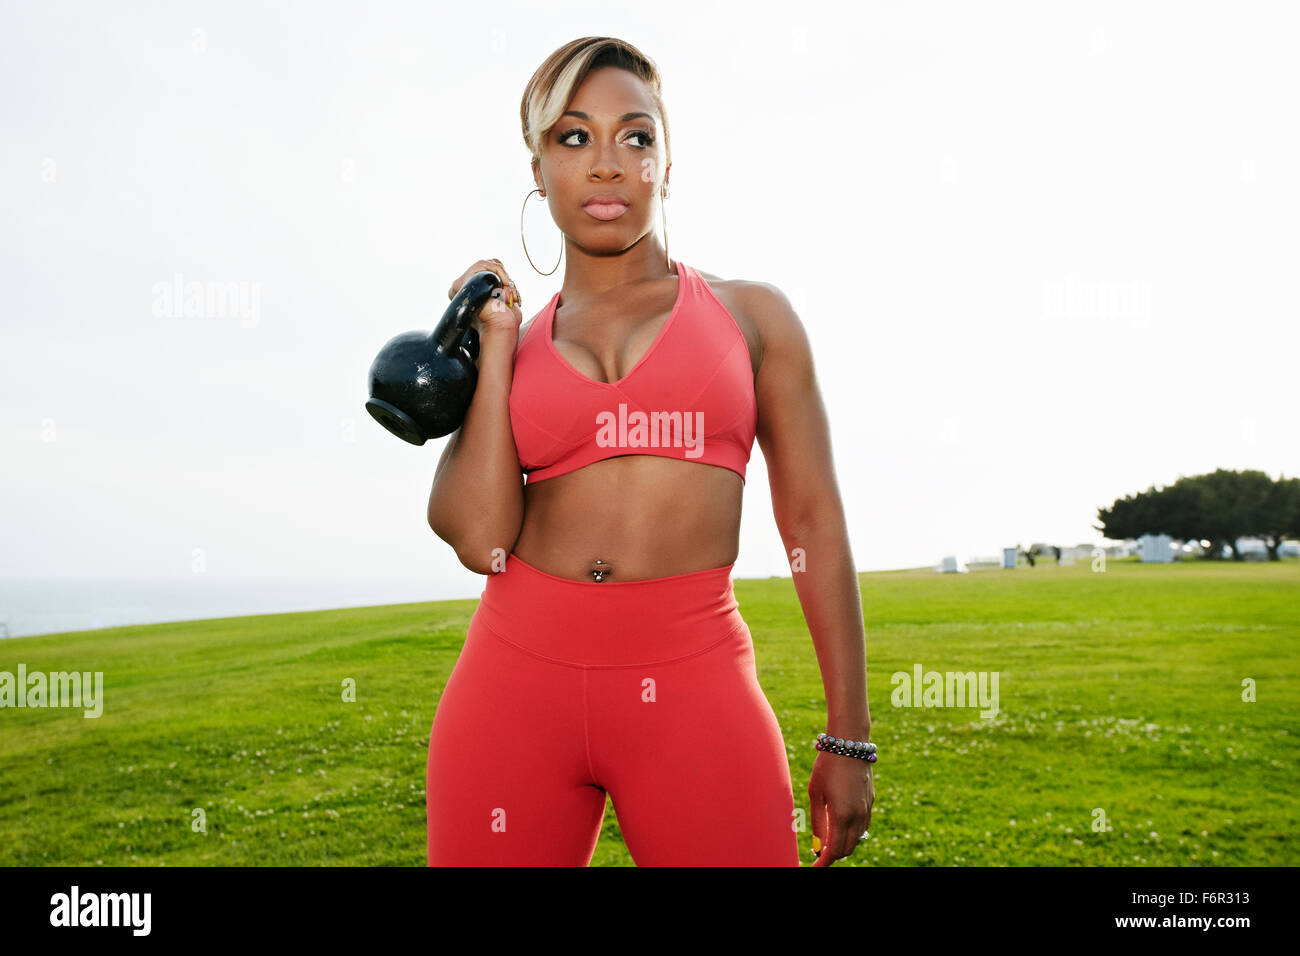 Black woman lifting weights in field Stock Photo